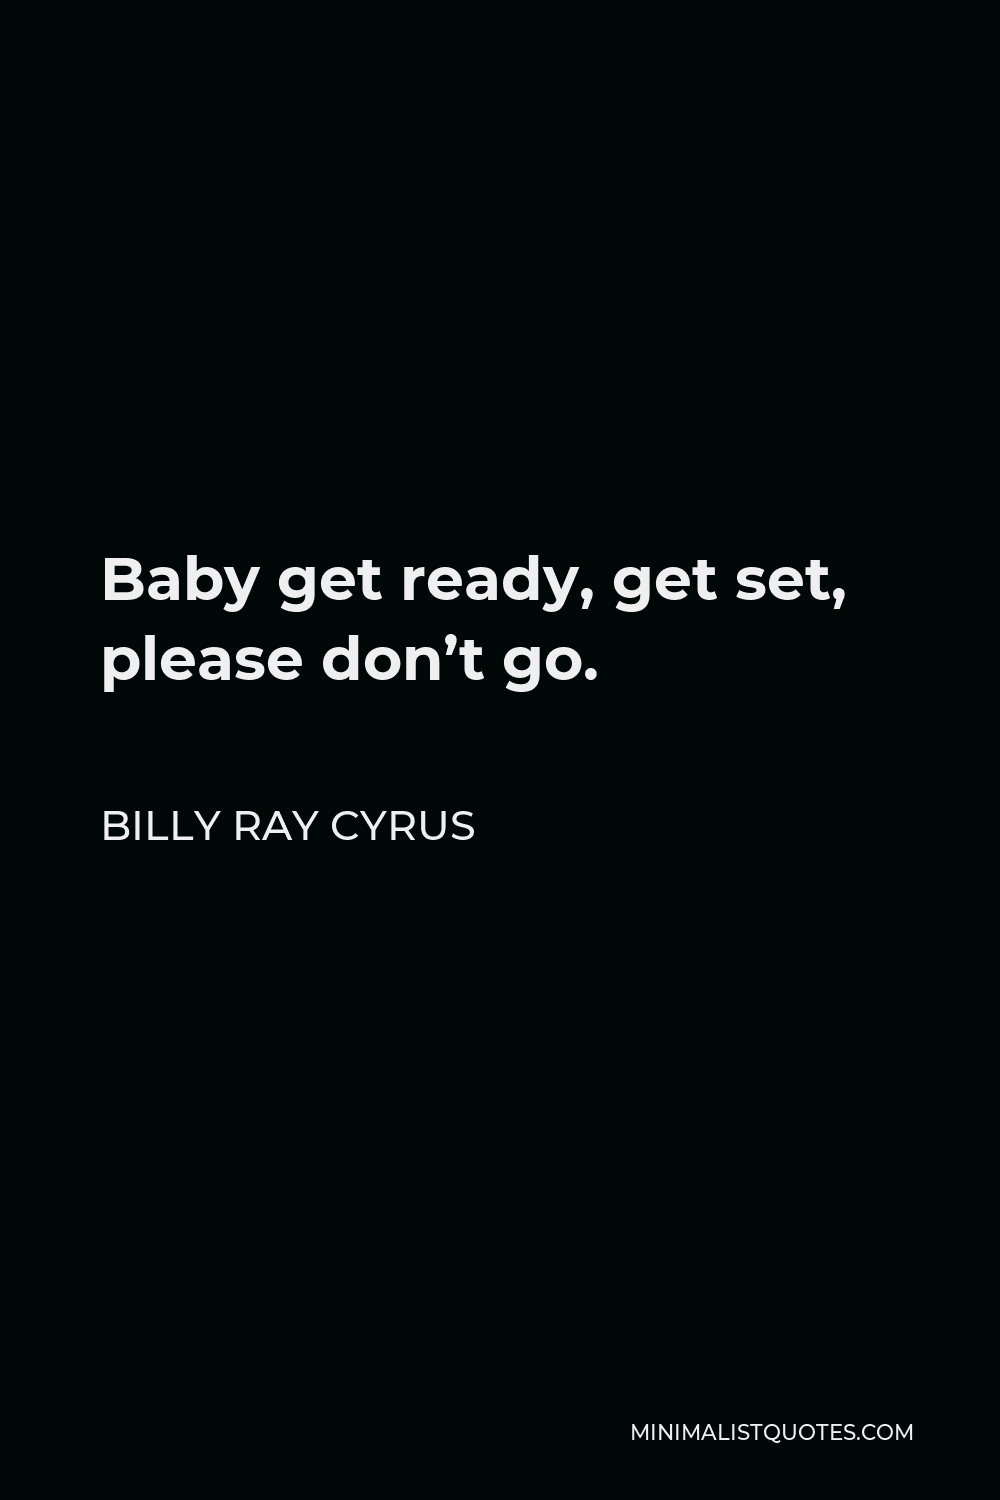 Billy Ray Cyrus Quote - Baby get ready, get set, please don’t go.